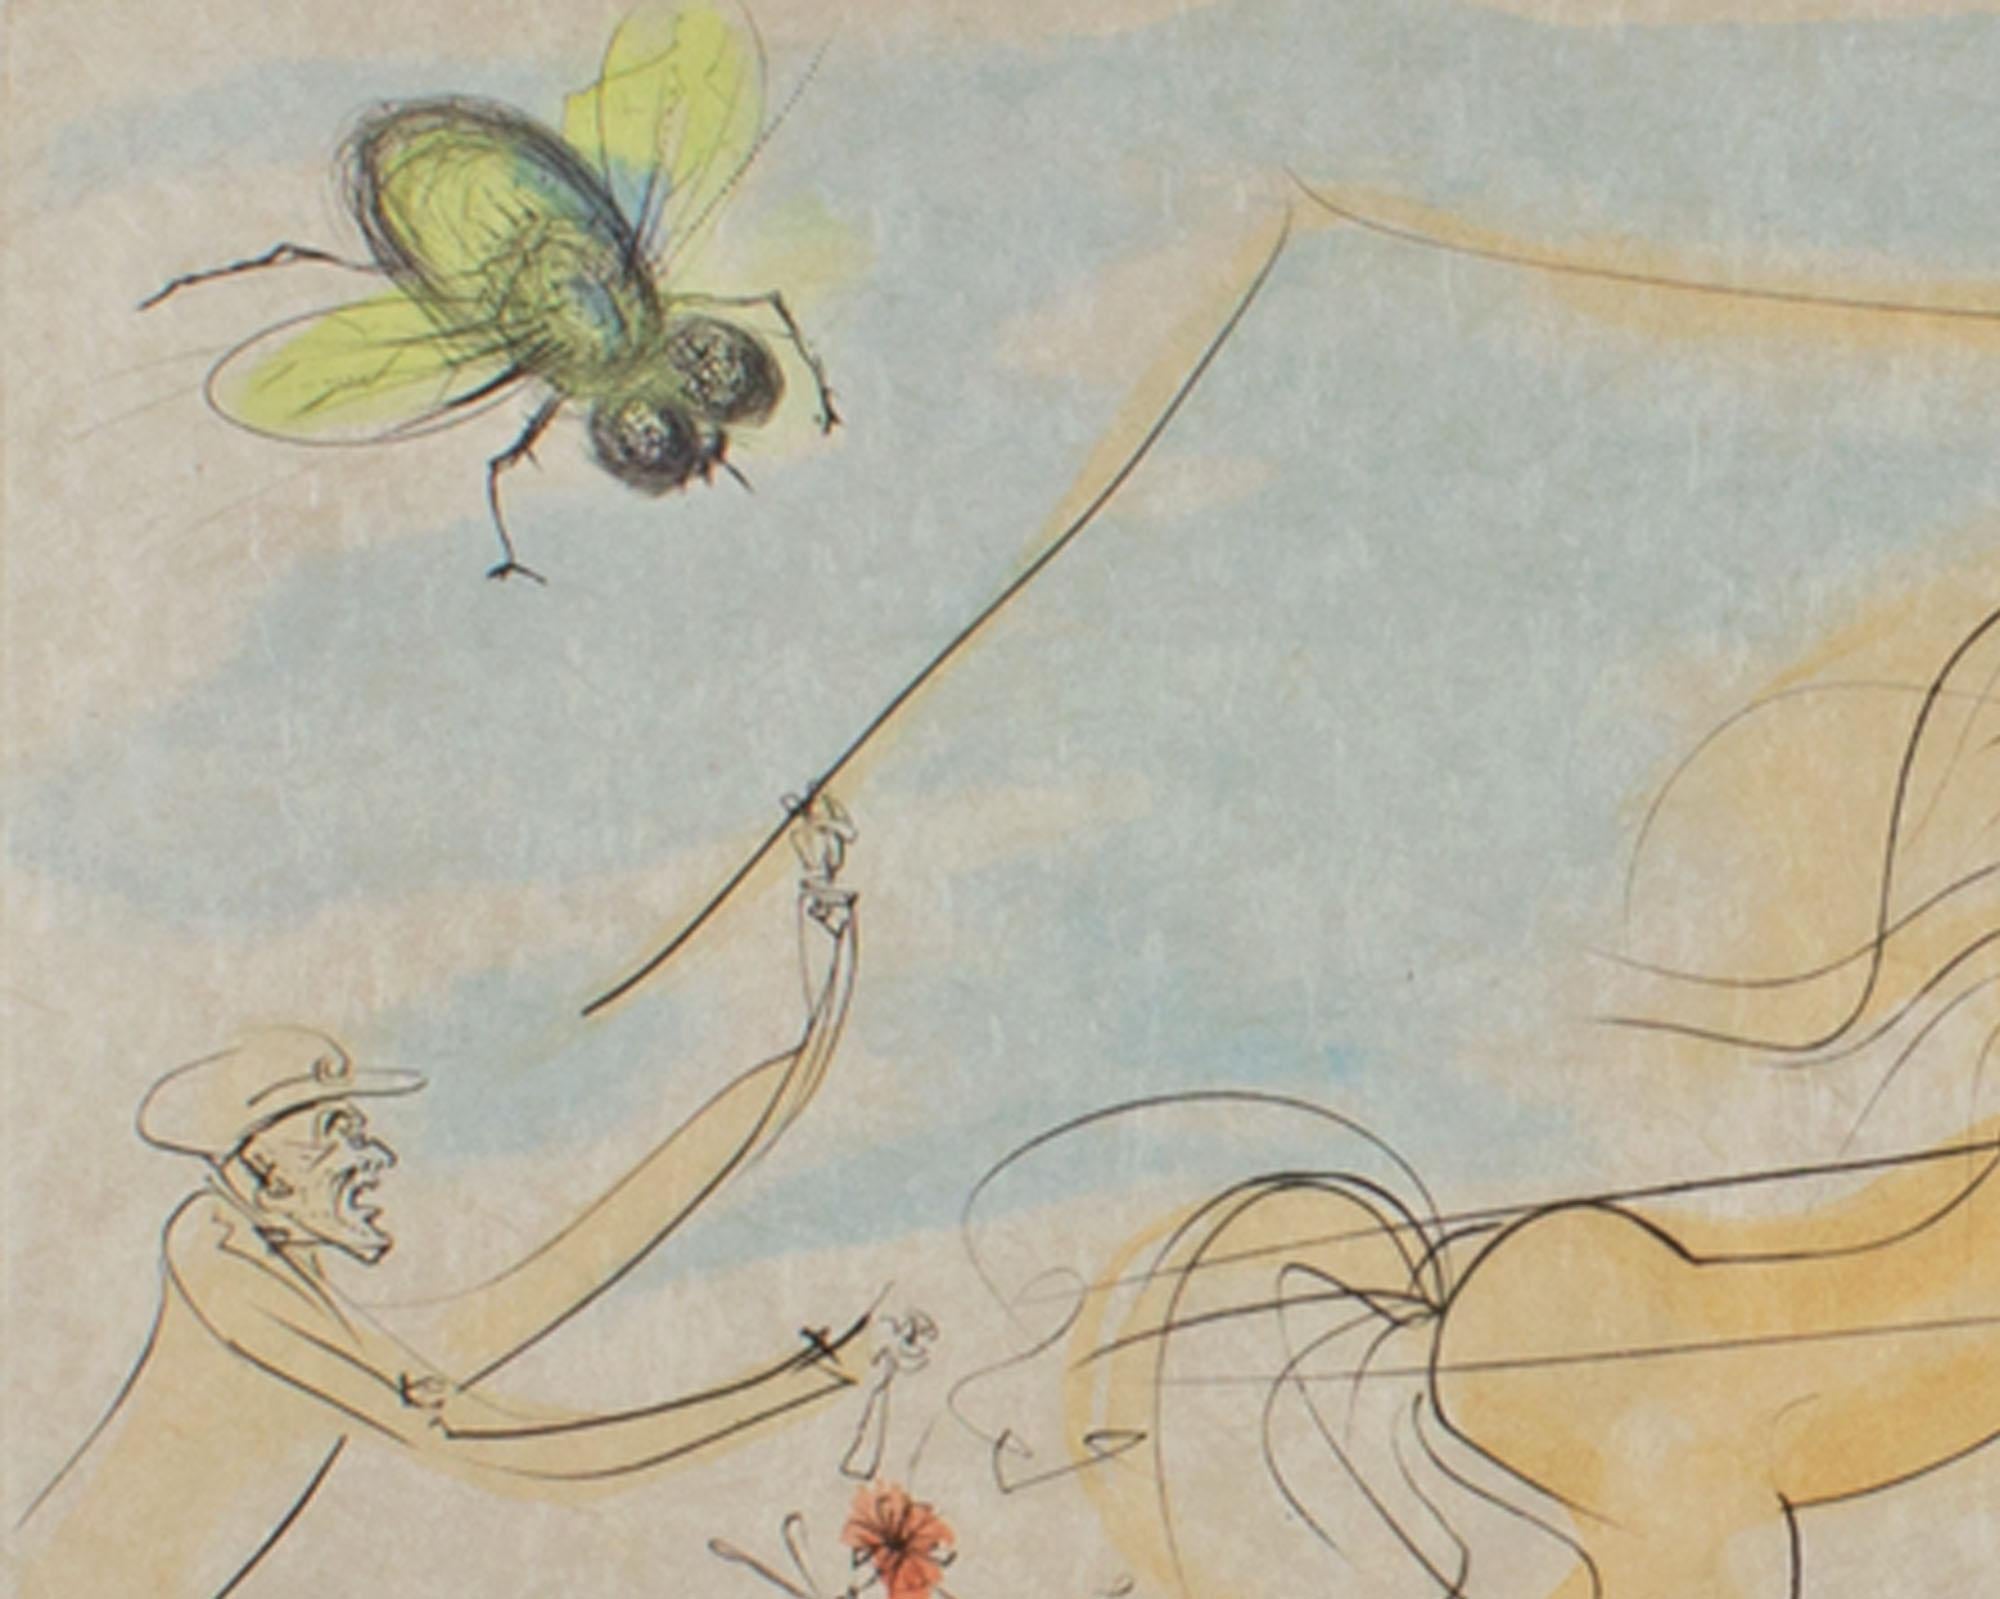 Etched Salvador Dali Signed 1974 “The Coach and the Fly” Drypoint Etching with Pochoir  For Sale